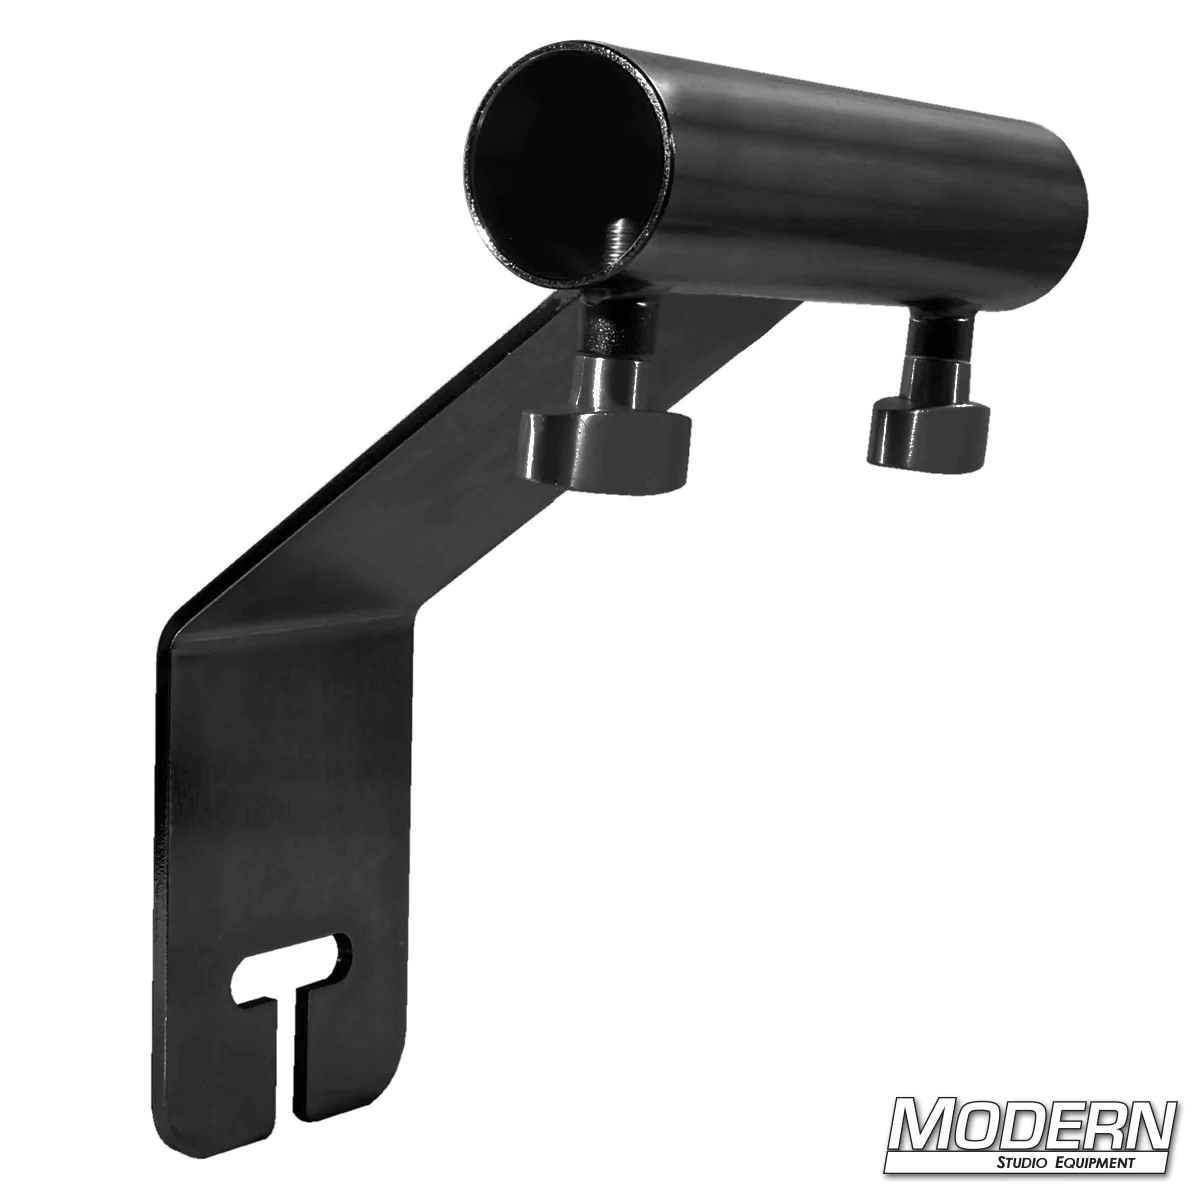 Offset Ear for 1-1/4-inch Speed-Rail® in black zinc with T-Handles, used for film grip rigging with gobo/grip head.